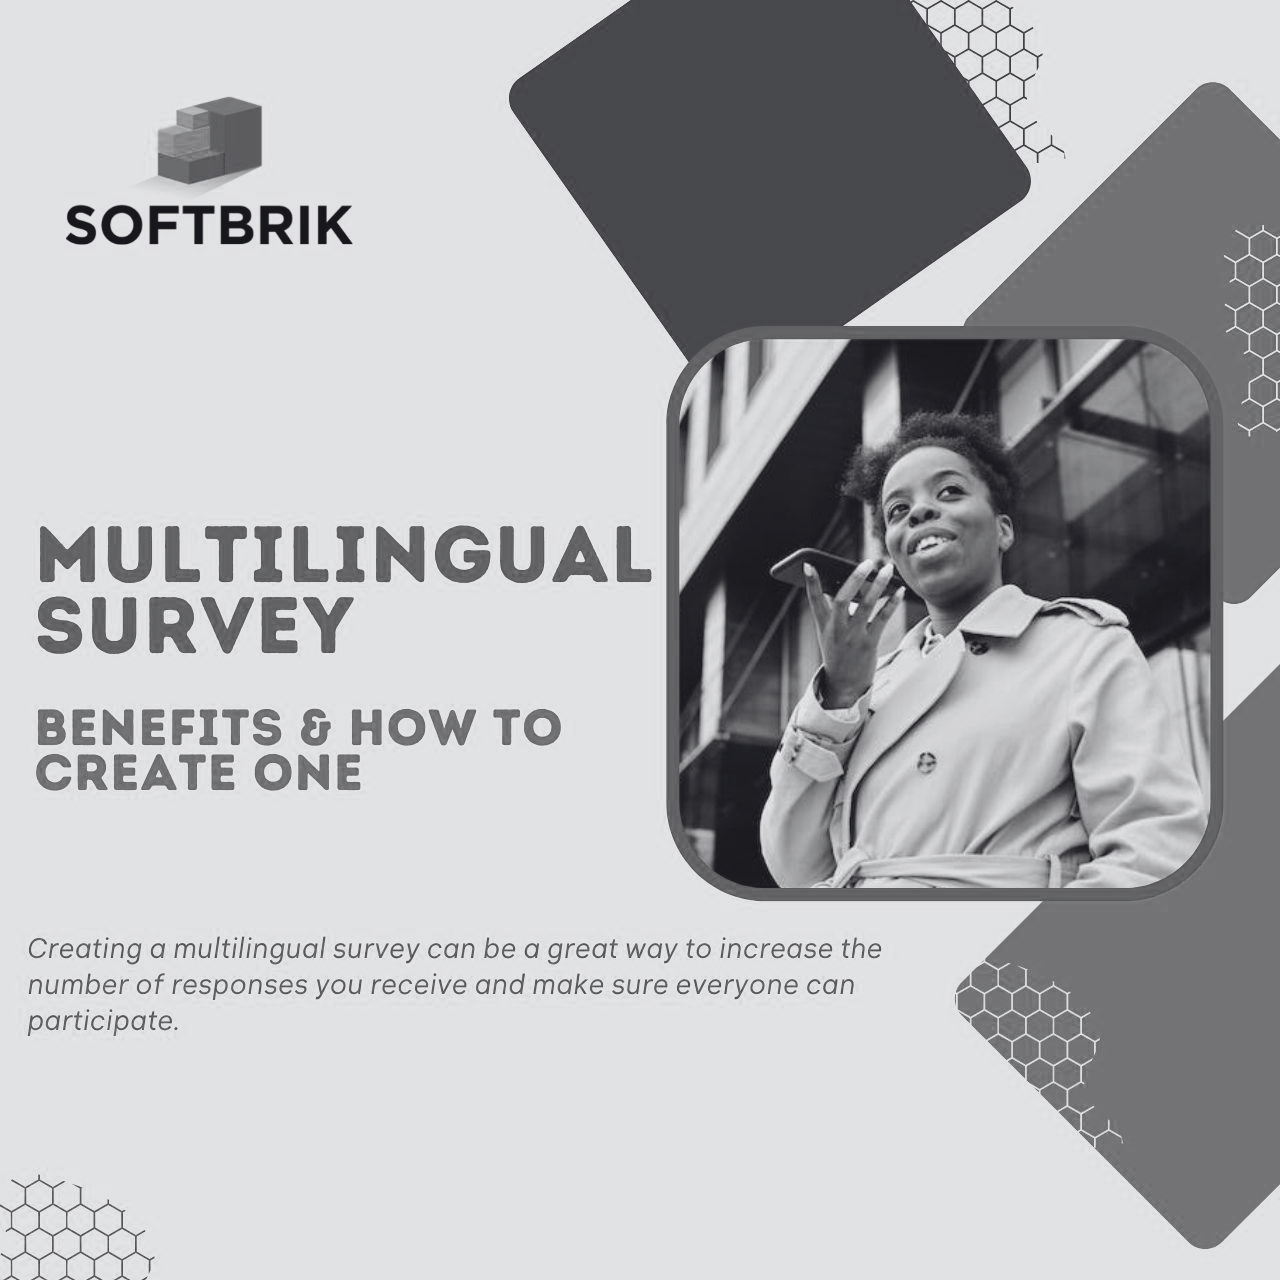 Multilingual Survey: Benefits & How to Create One